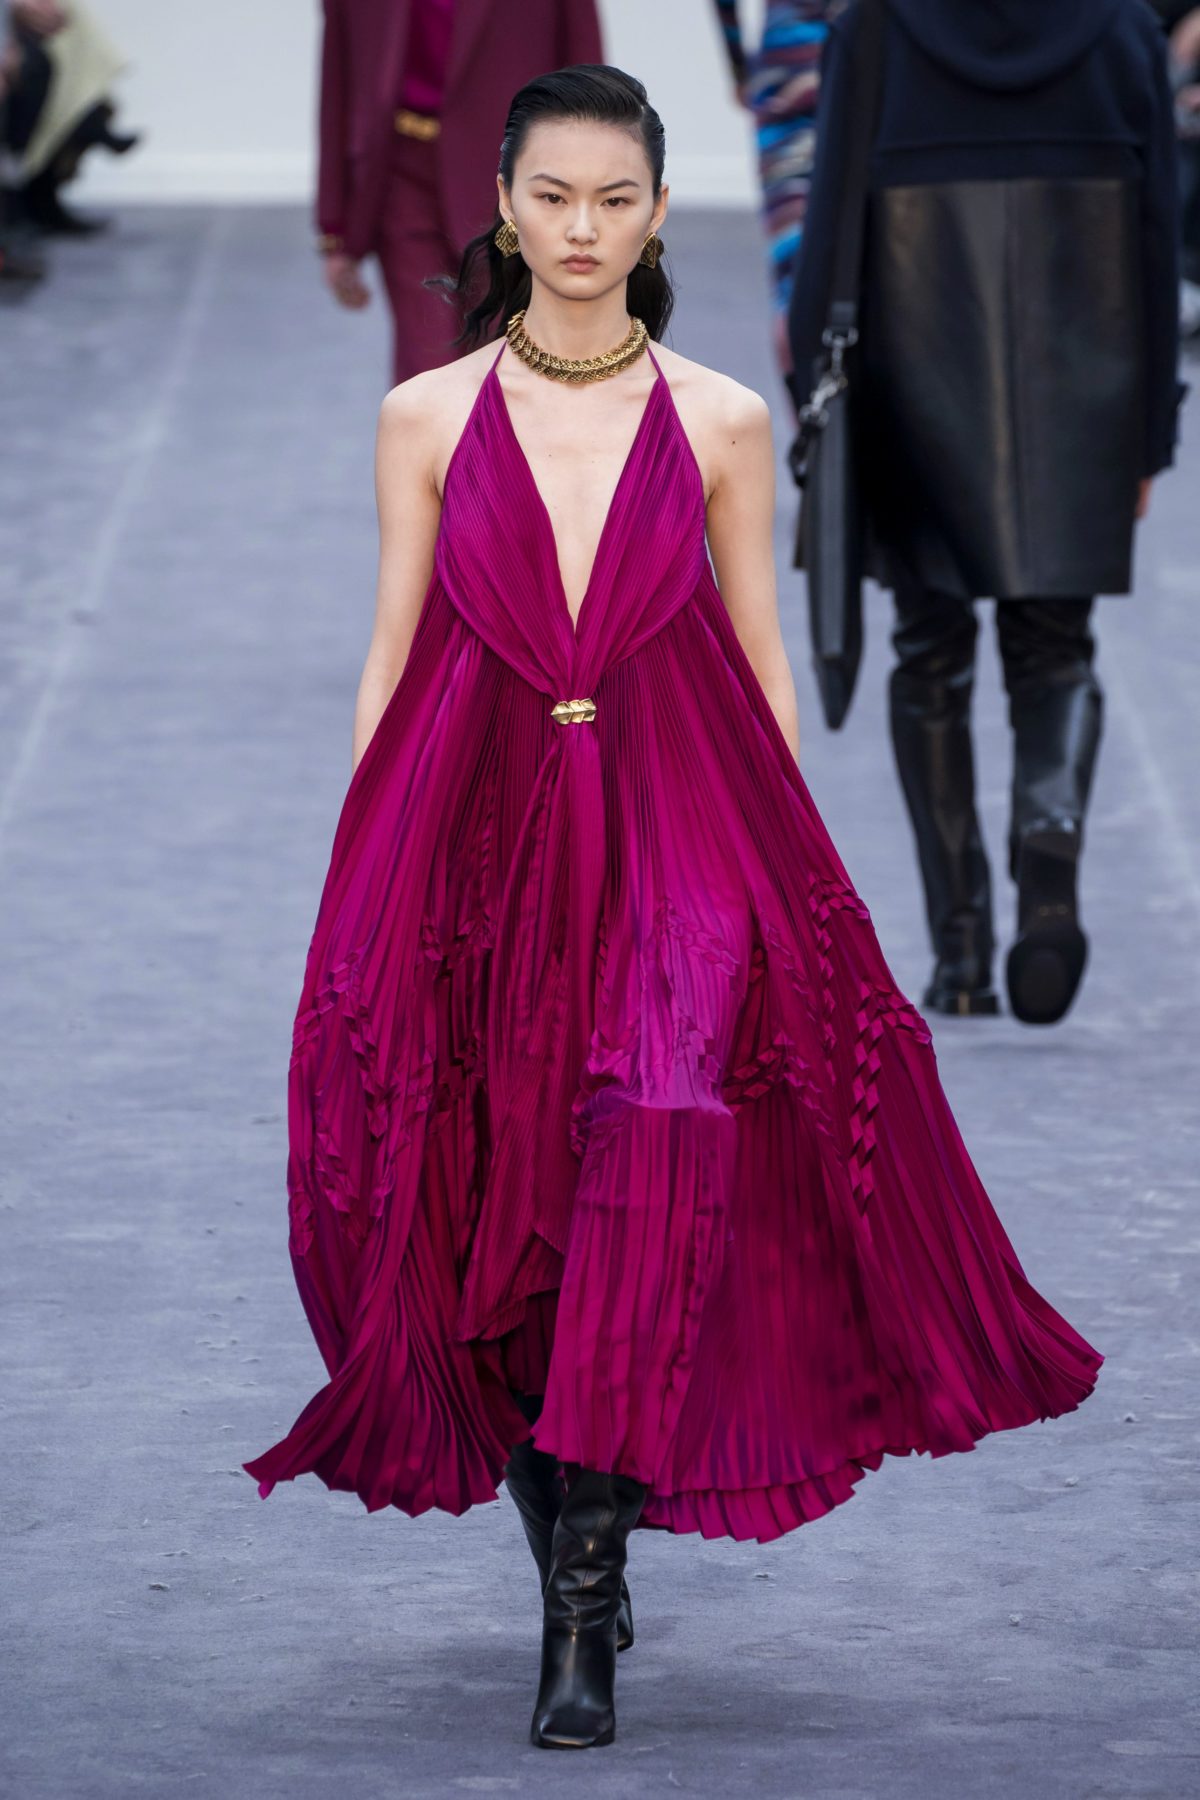 Milan Fashion Week Fall 2019: The Top Trends, Themes & Fashion Moods ...